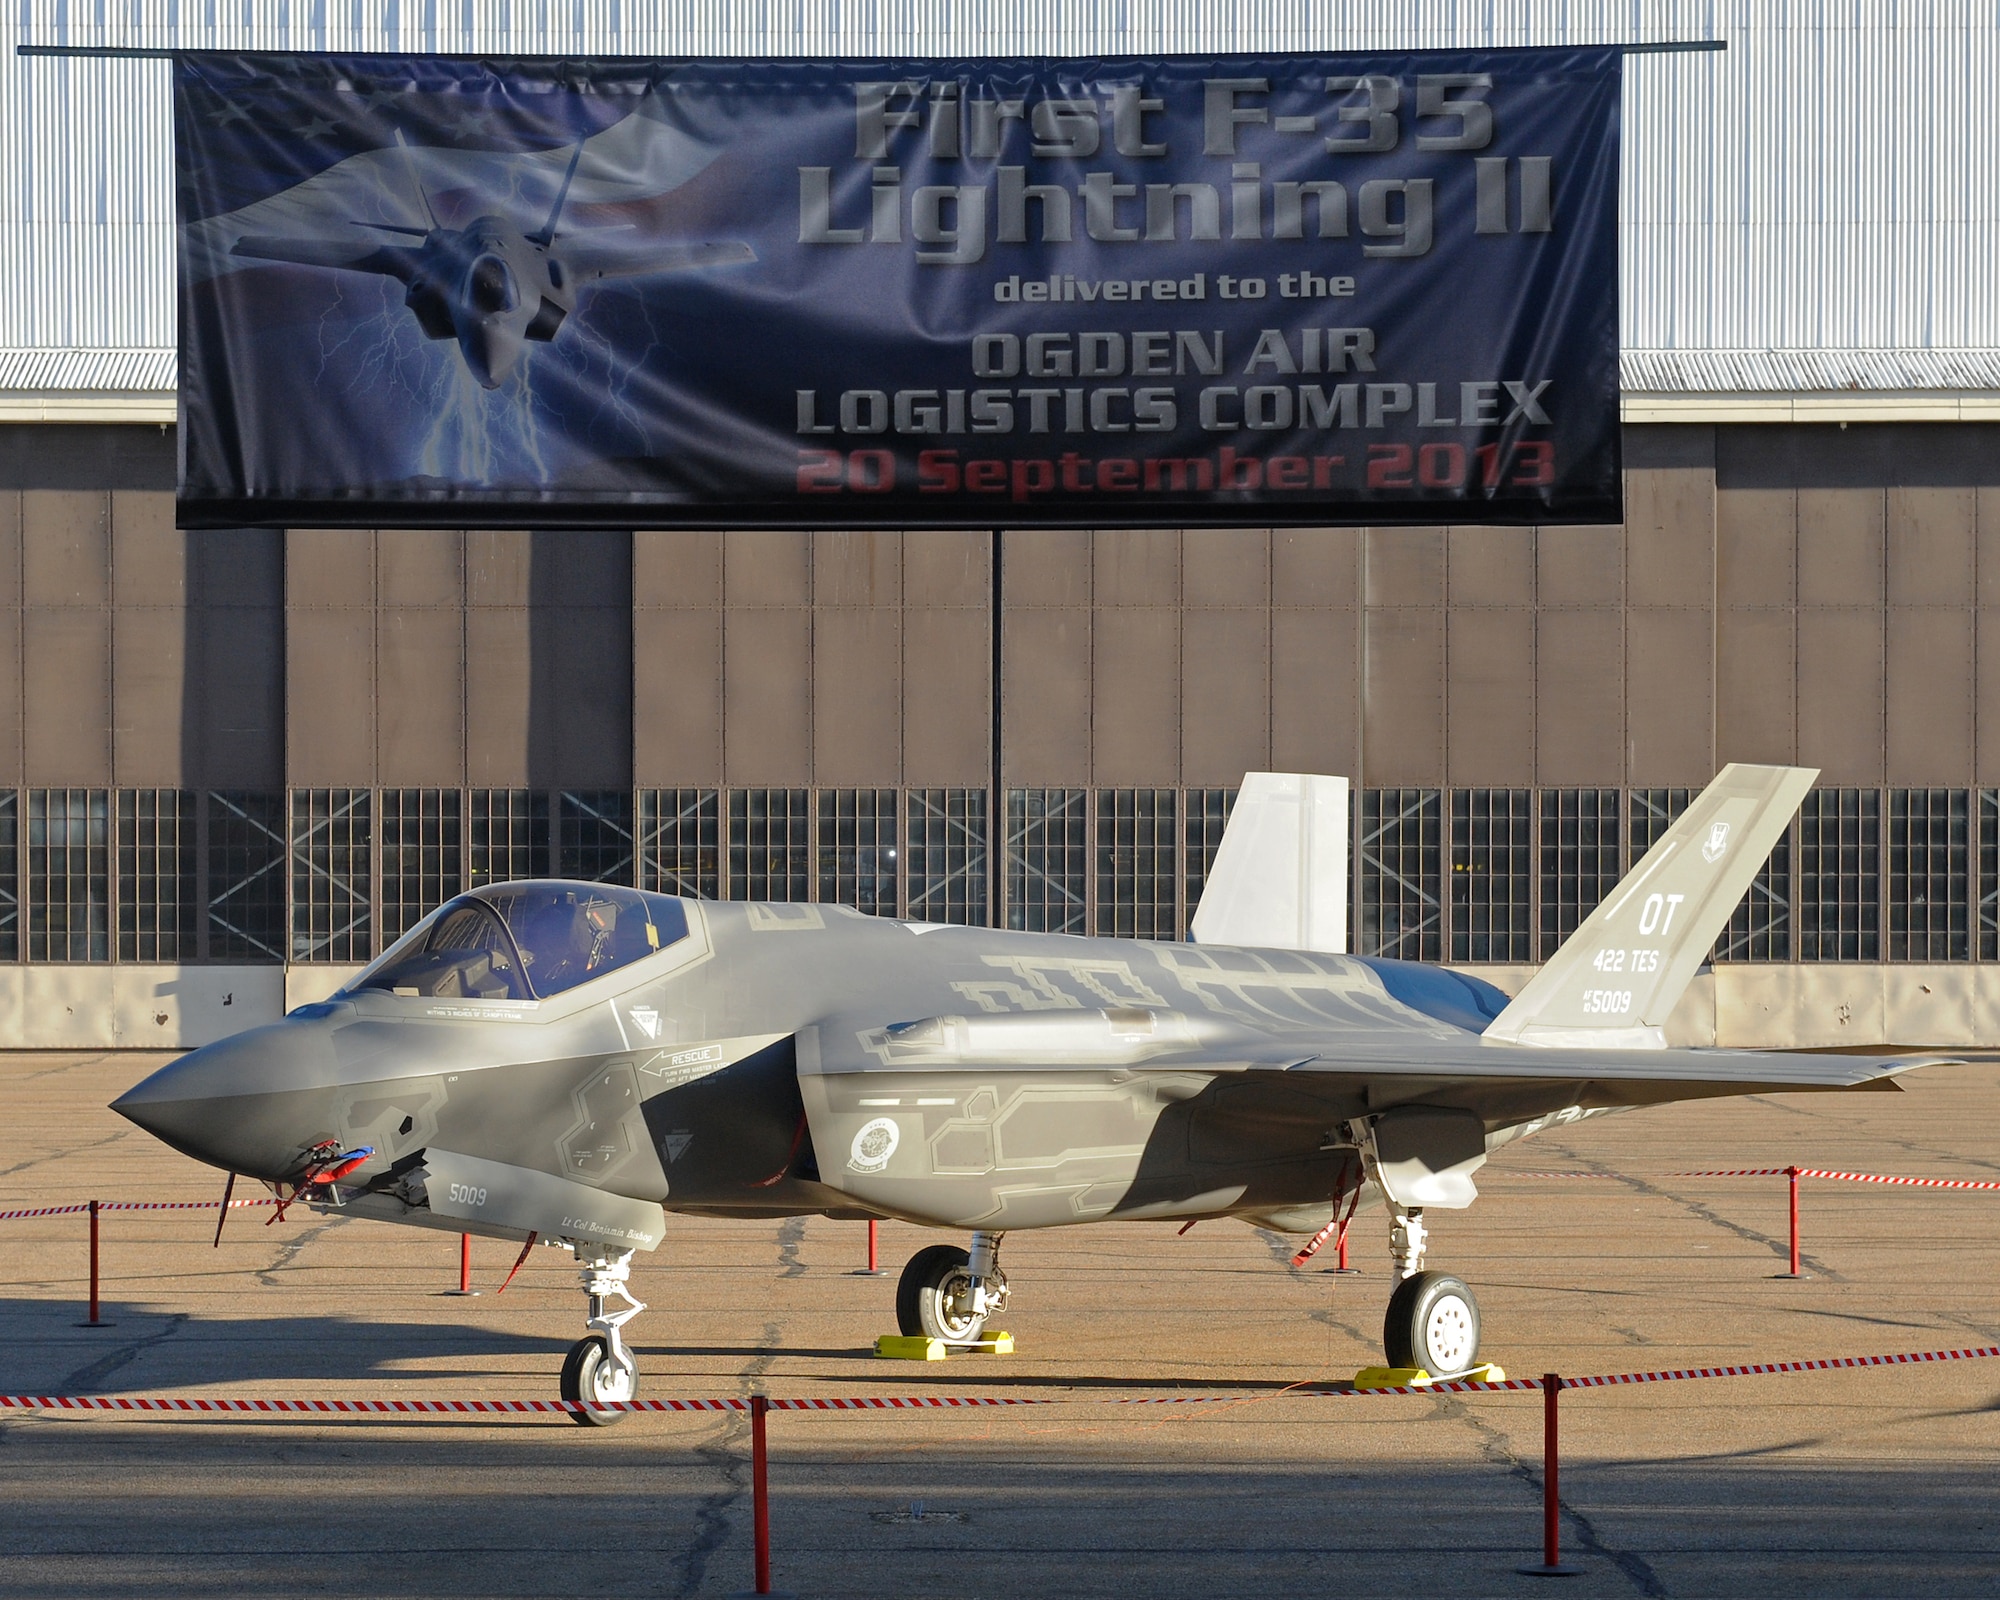 The first F-35A Lightning II Joint Strike Fighter to arrive at Hill Air Force Base, Utah, sits on display in front of a hangar the morning of Sept. 20, 2013. Hill, Lockheed Martin, Utah elected officials and the community gathered for a ceremony to commemorate the beginning of F-35 depot maintenance at Hill AFB. The F-35 is a multi-variant, multi-role, fifth generation fighter, and will undergo organic depot modification work at Hill AFB. (U.S. Air Force photo by Alex R. Lloyd/Released)